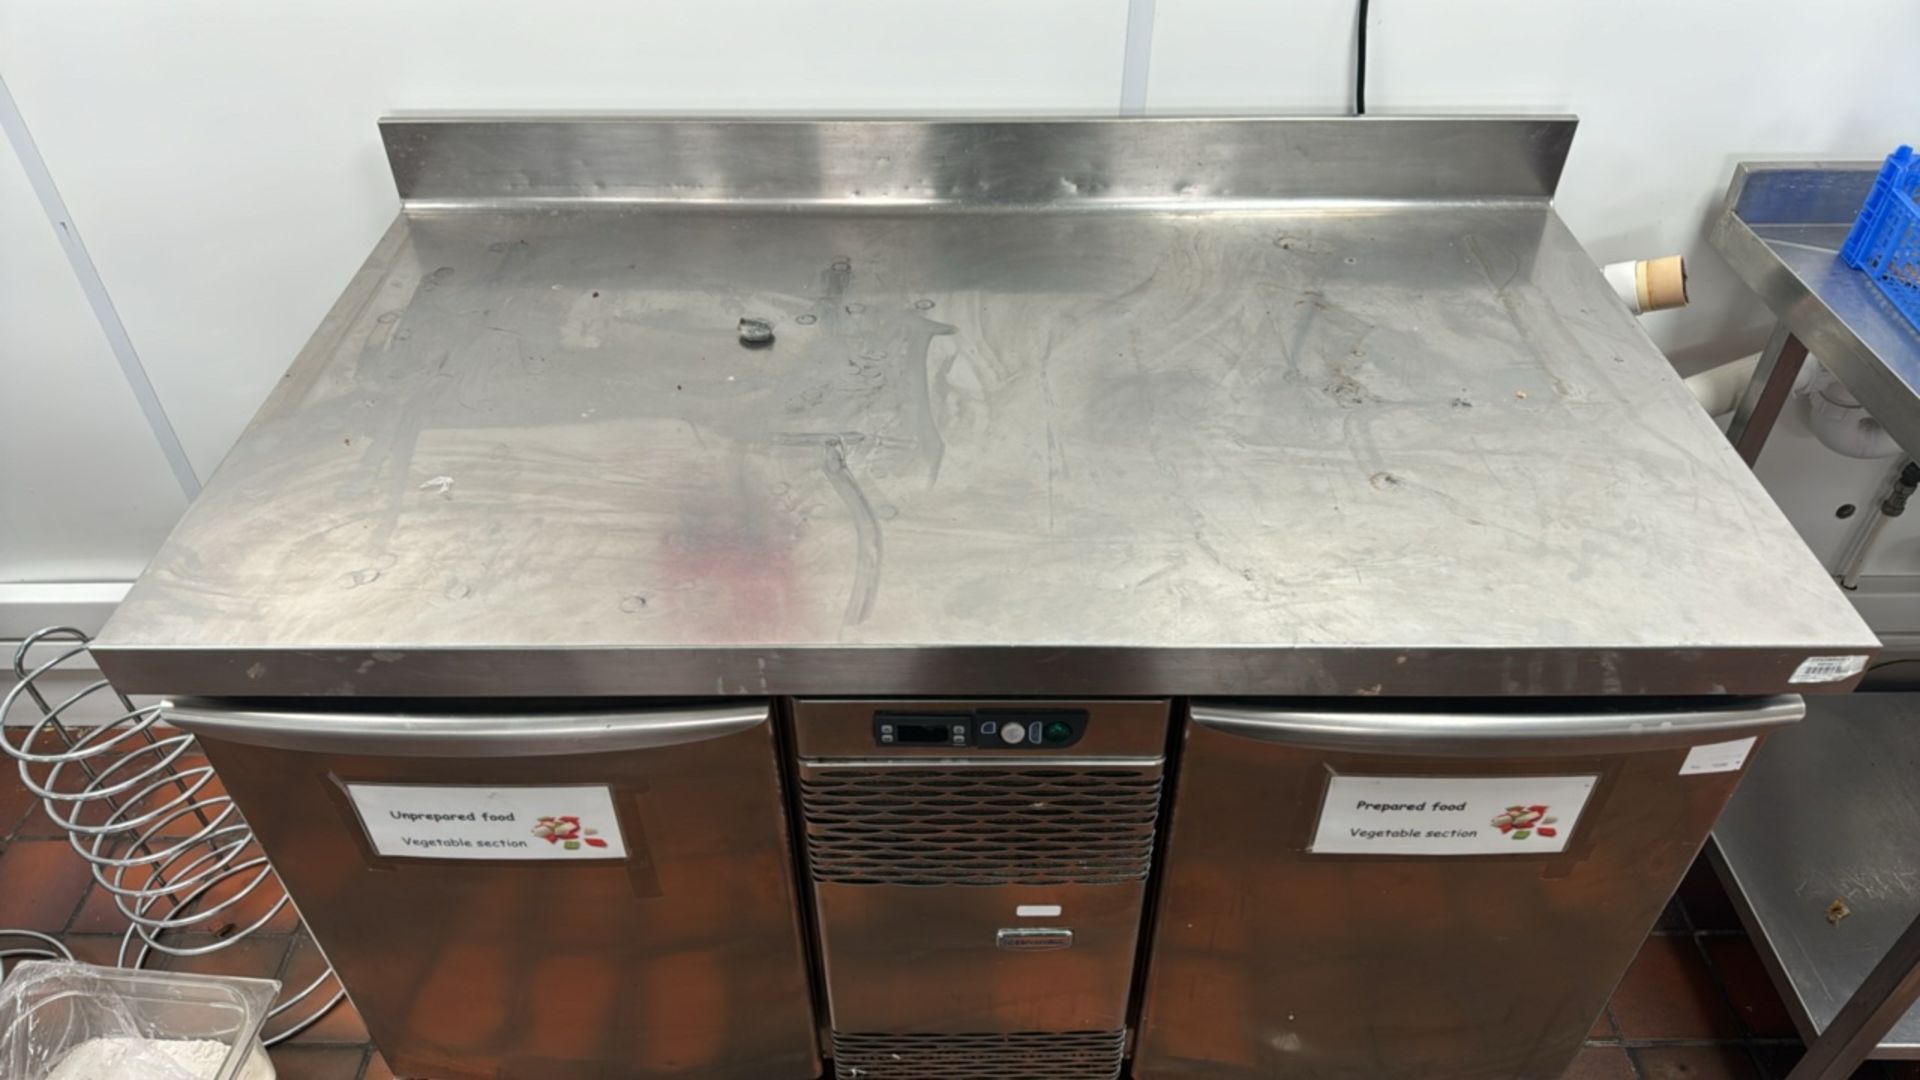 Electrolux Stainless Steel Preparation Unit With Under Counter Fridges - Image 2 of 9